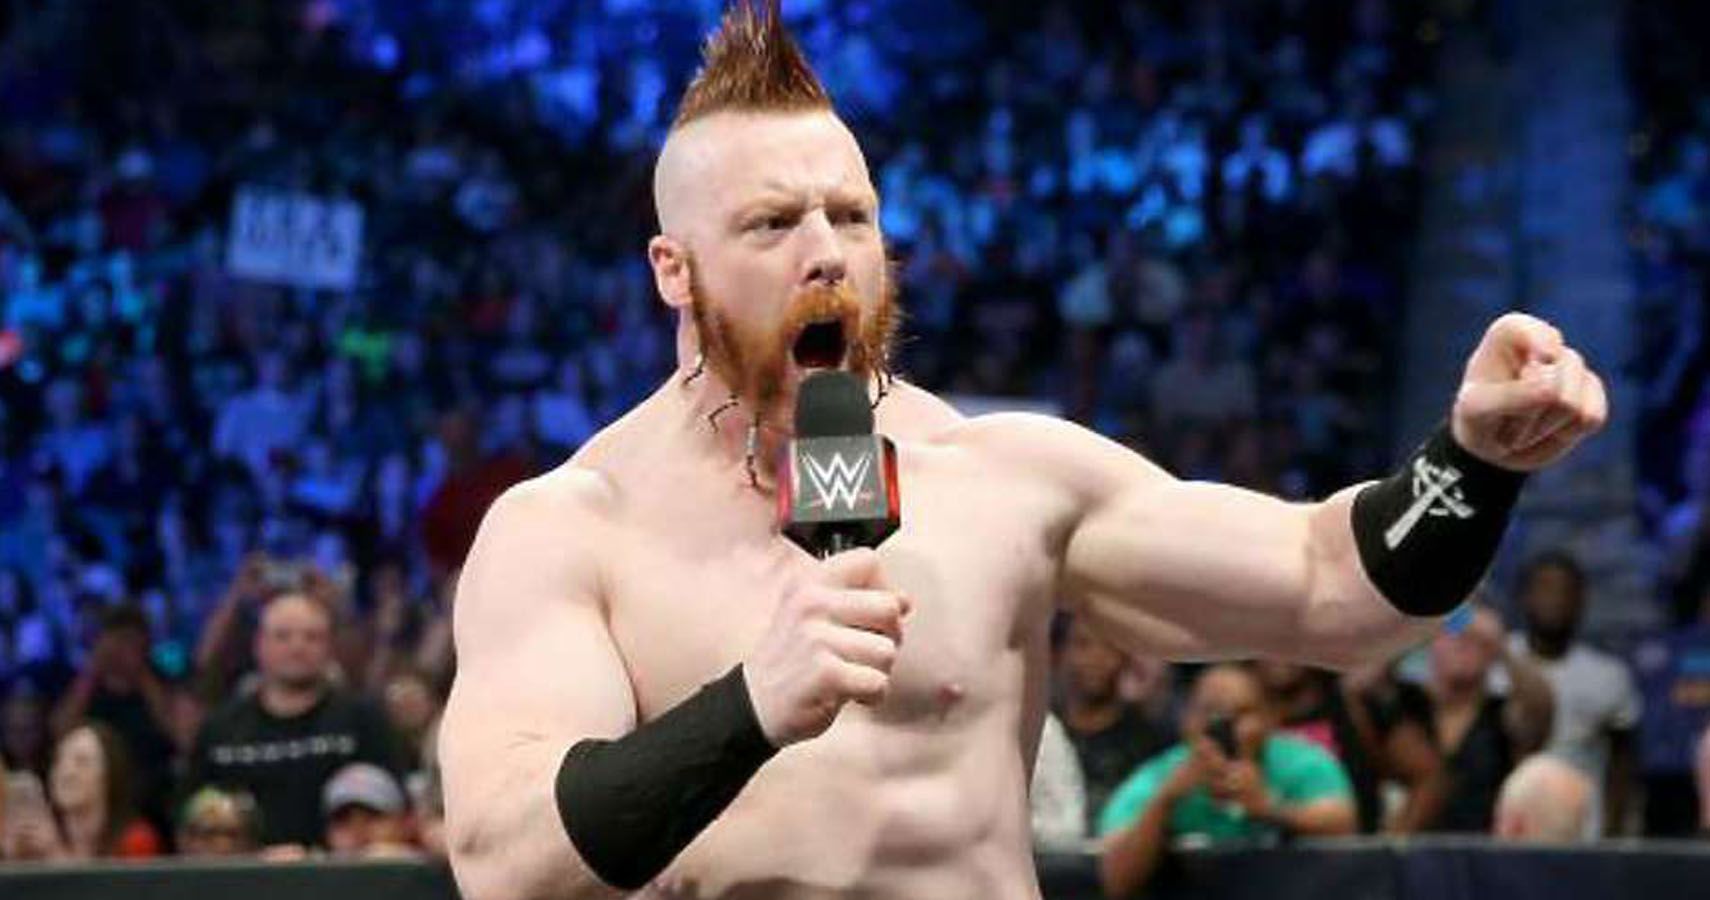 Sheamus makes fun of the crowd during 